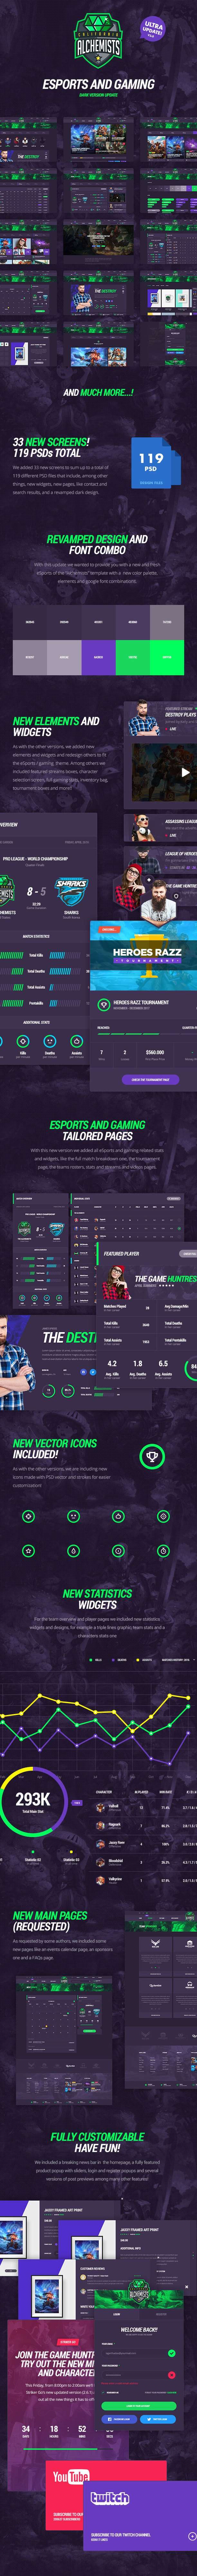 The Alchemists - Sports News PSD Template V4.0 + eSports & Gaming - 12